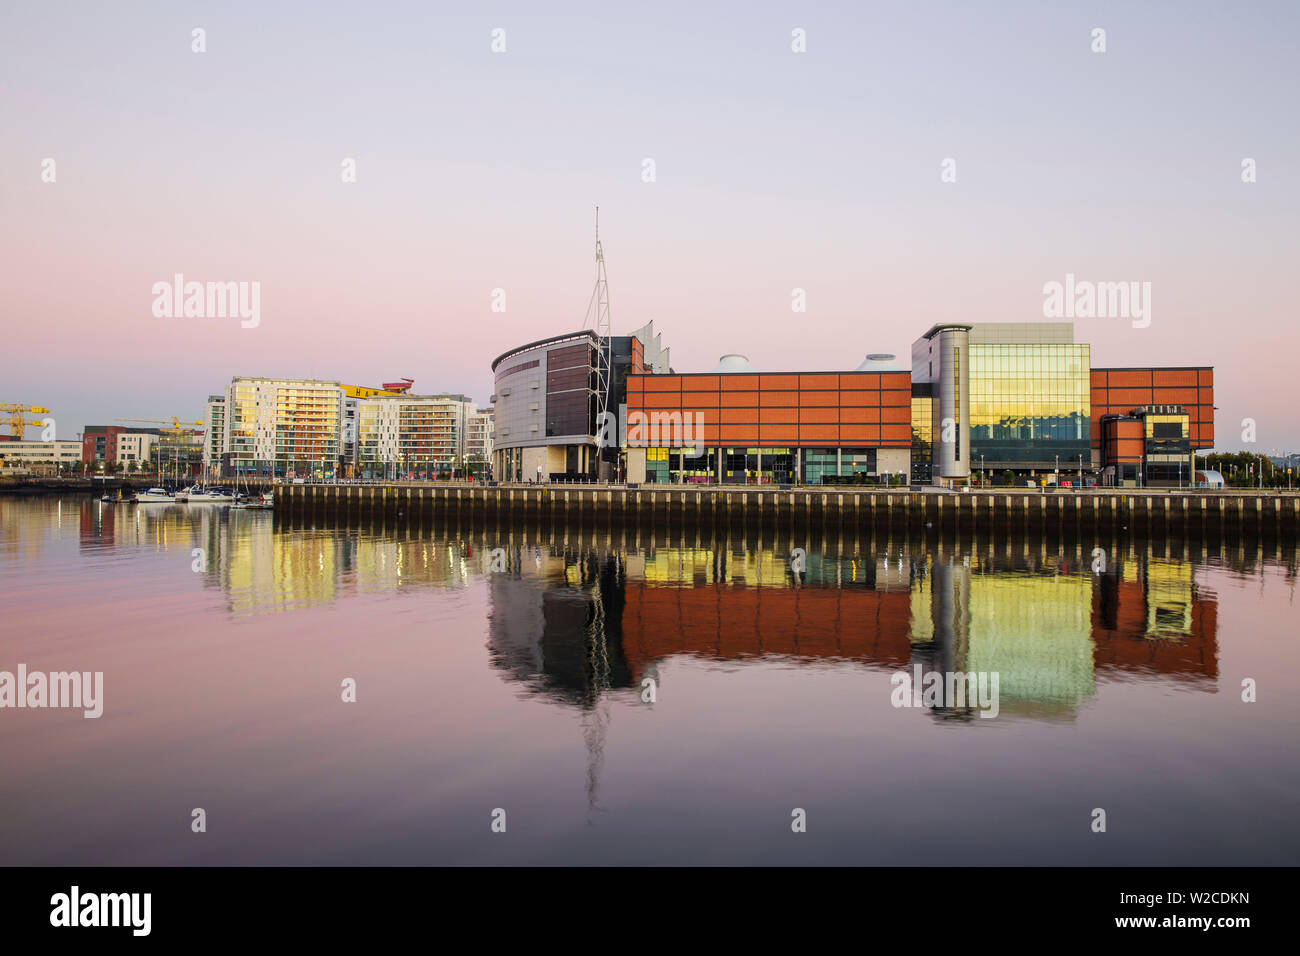 United Kingdom, Northern Ireland, Belfast, The SSE Arena, formerly known as the Odyssey Arena and W5 Science and discovery centre Stock Photo